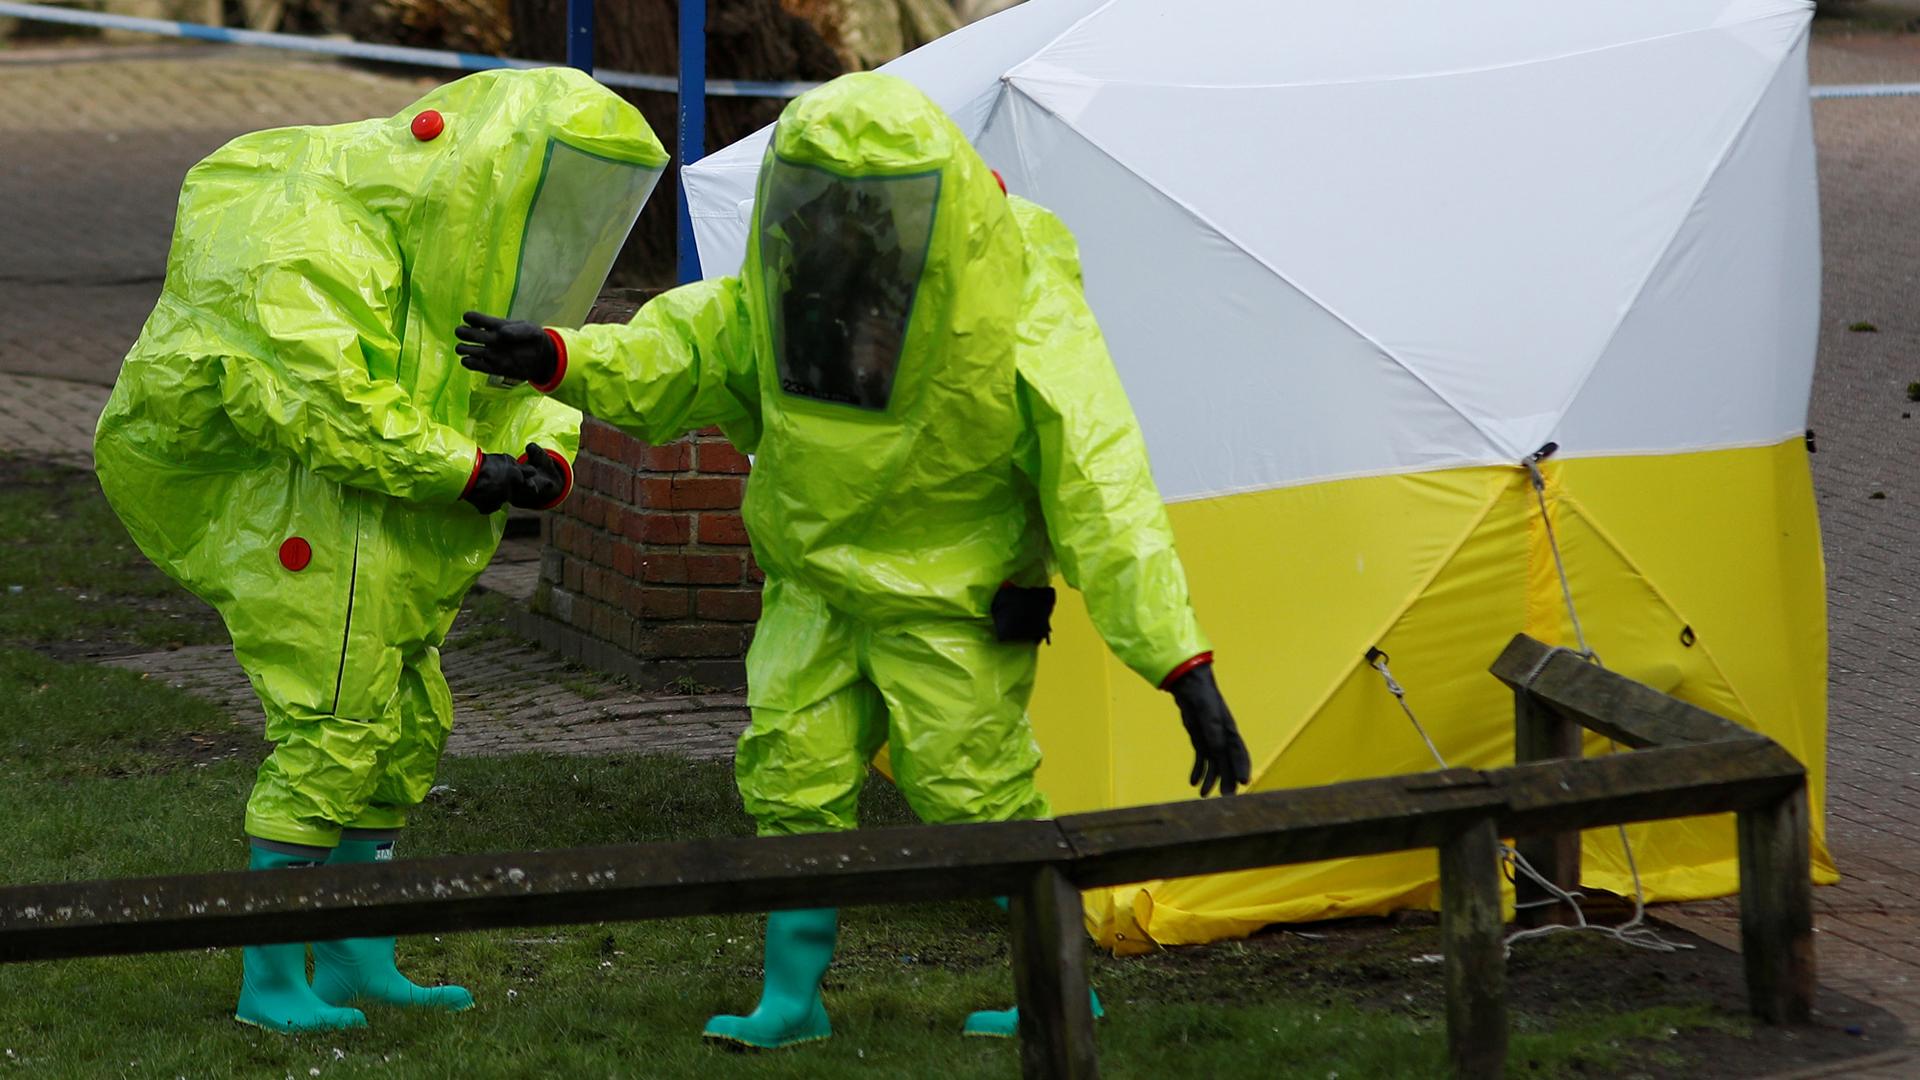 Officials working where Sergei Skripal and his daughter Yulia were found in Salisbury, Britain.